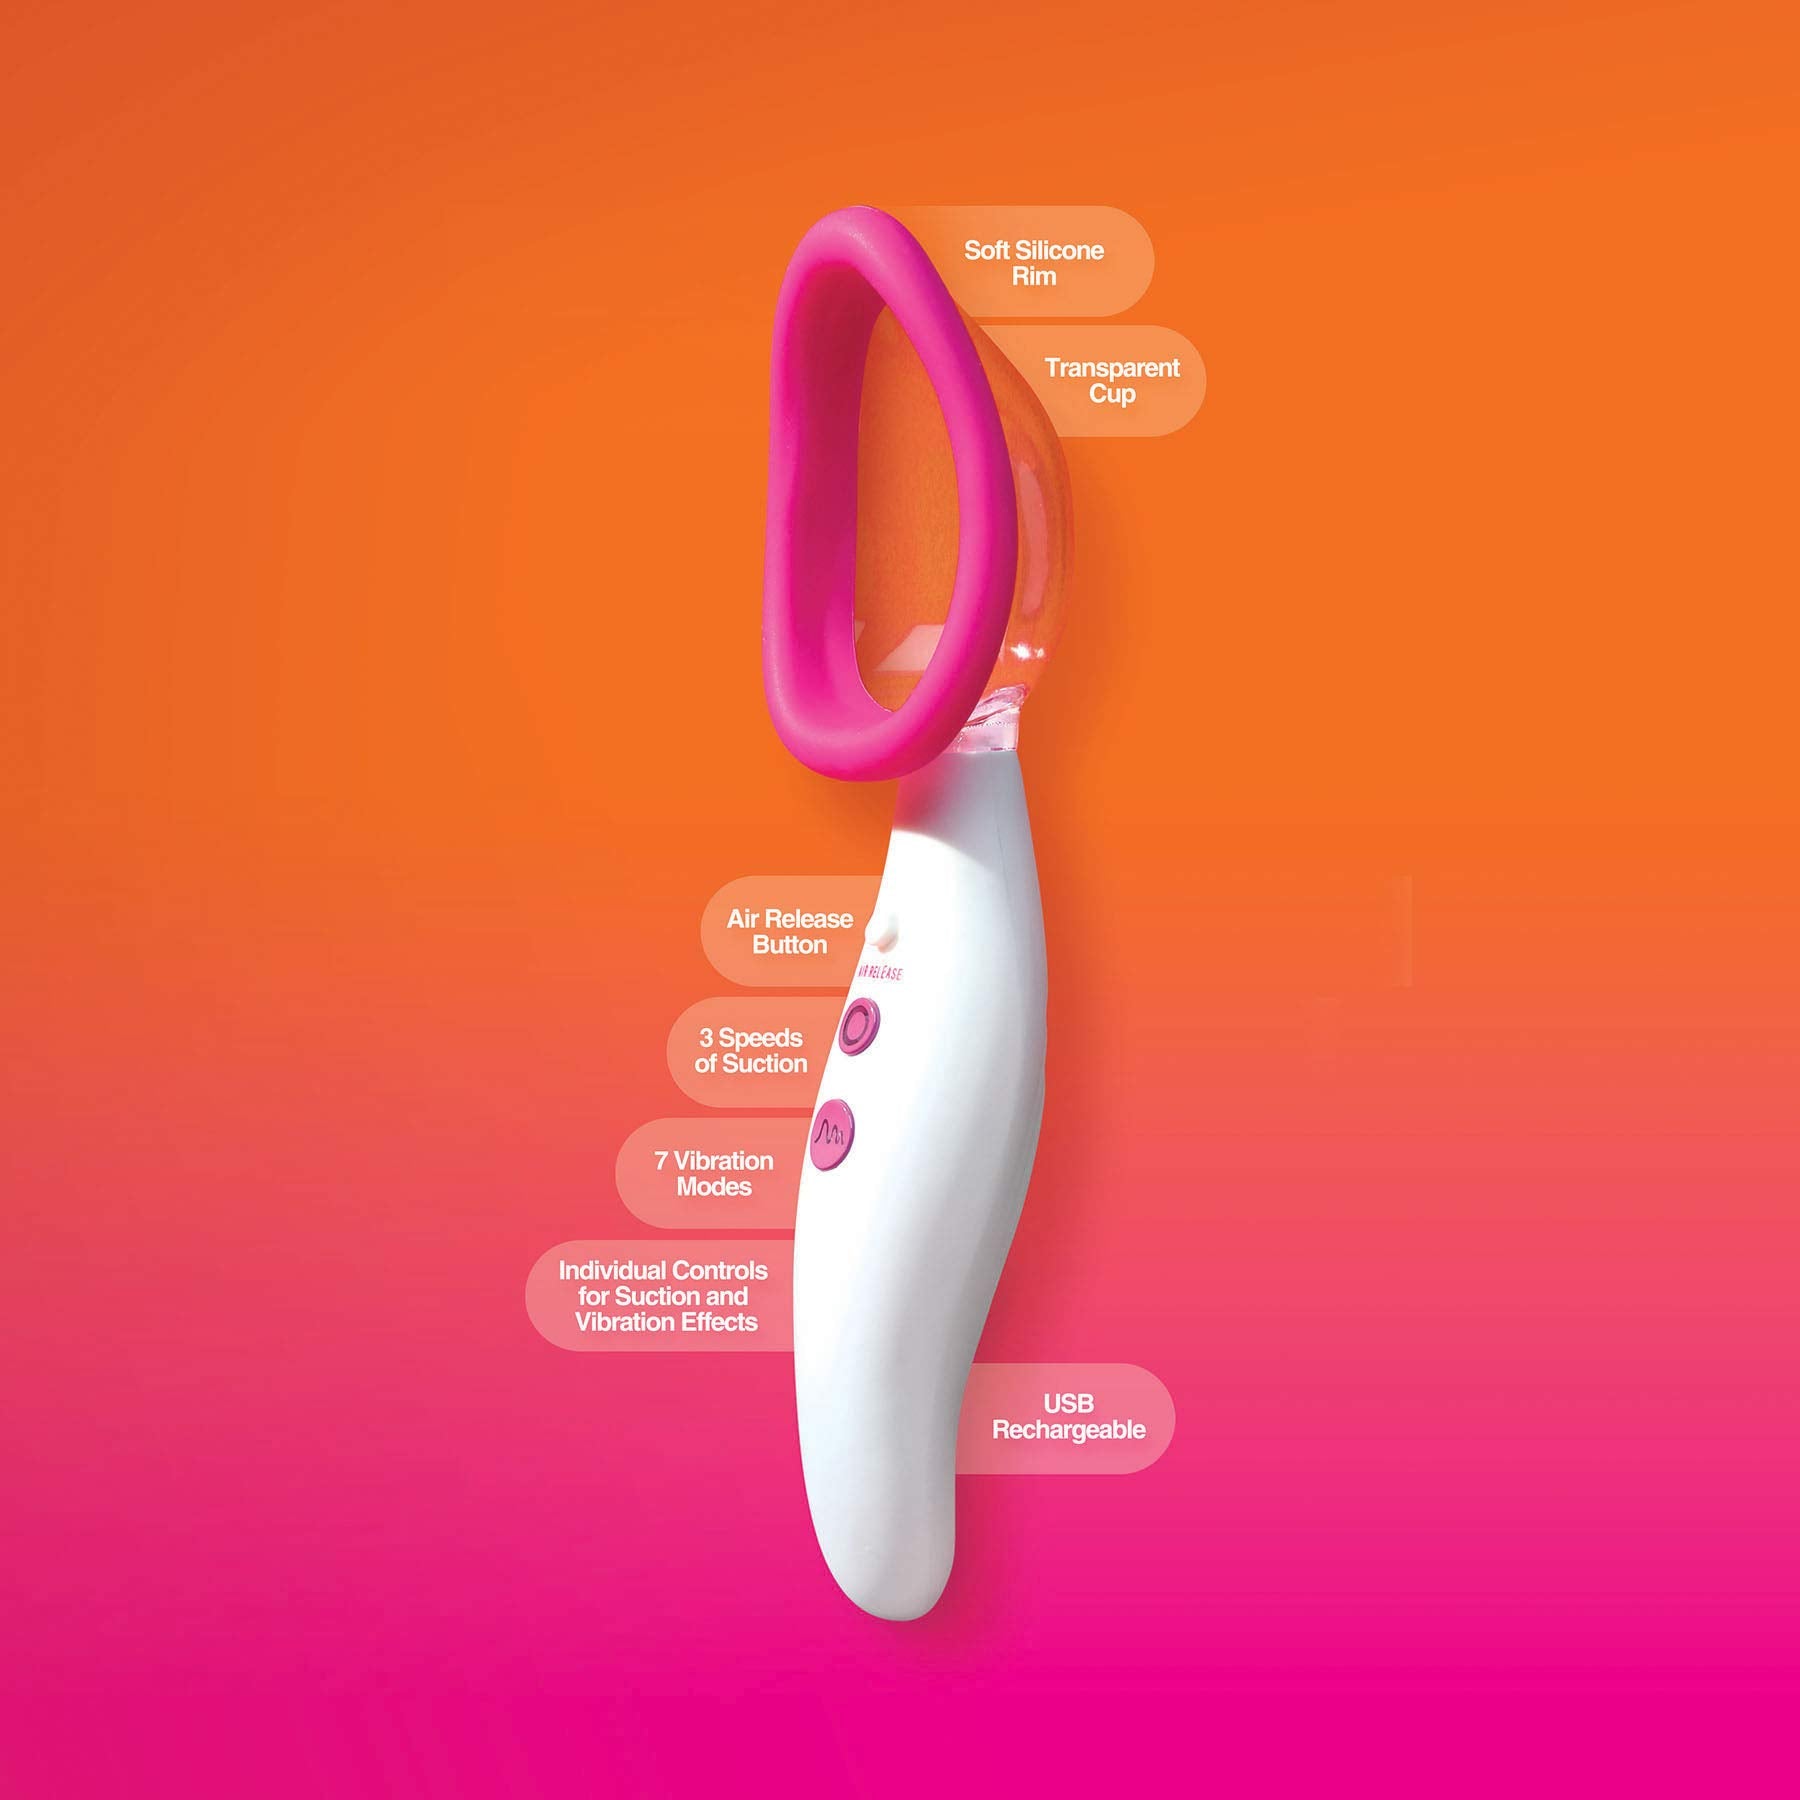 Automatic Pussy Pump Vibrator photo picture